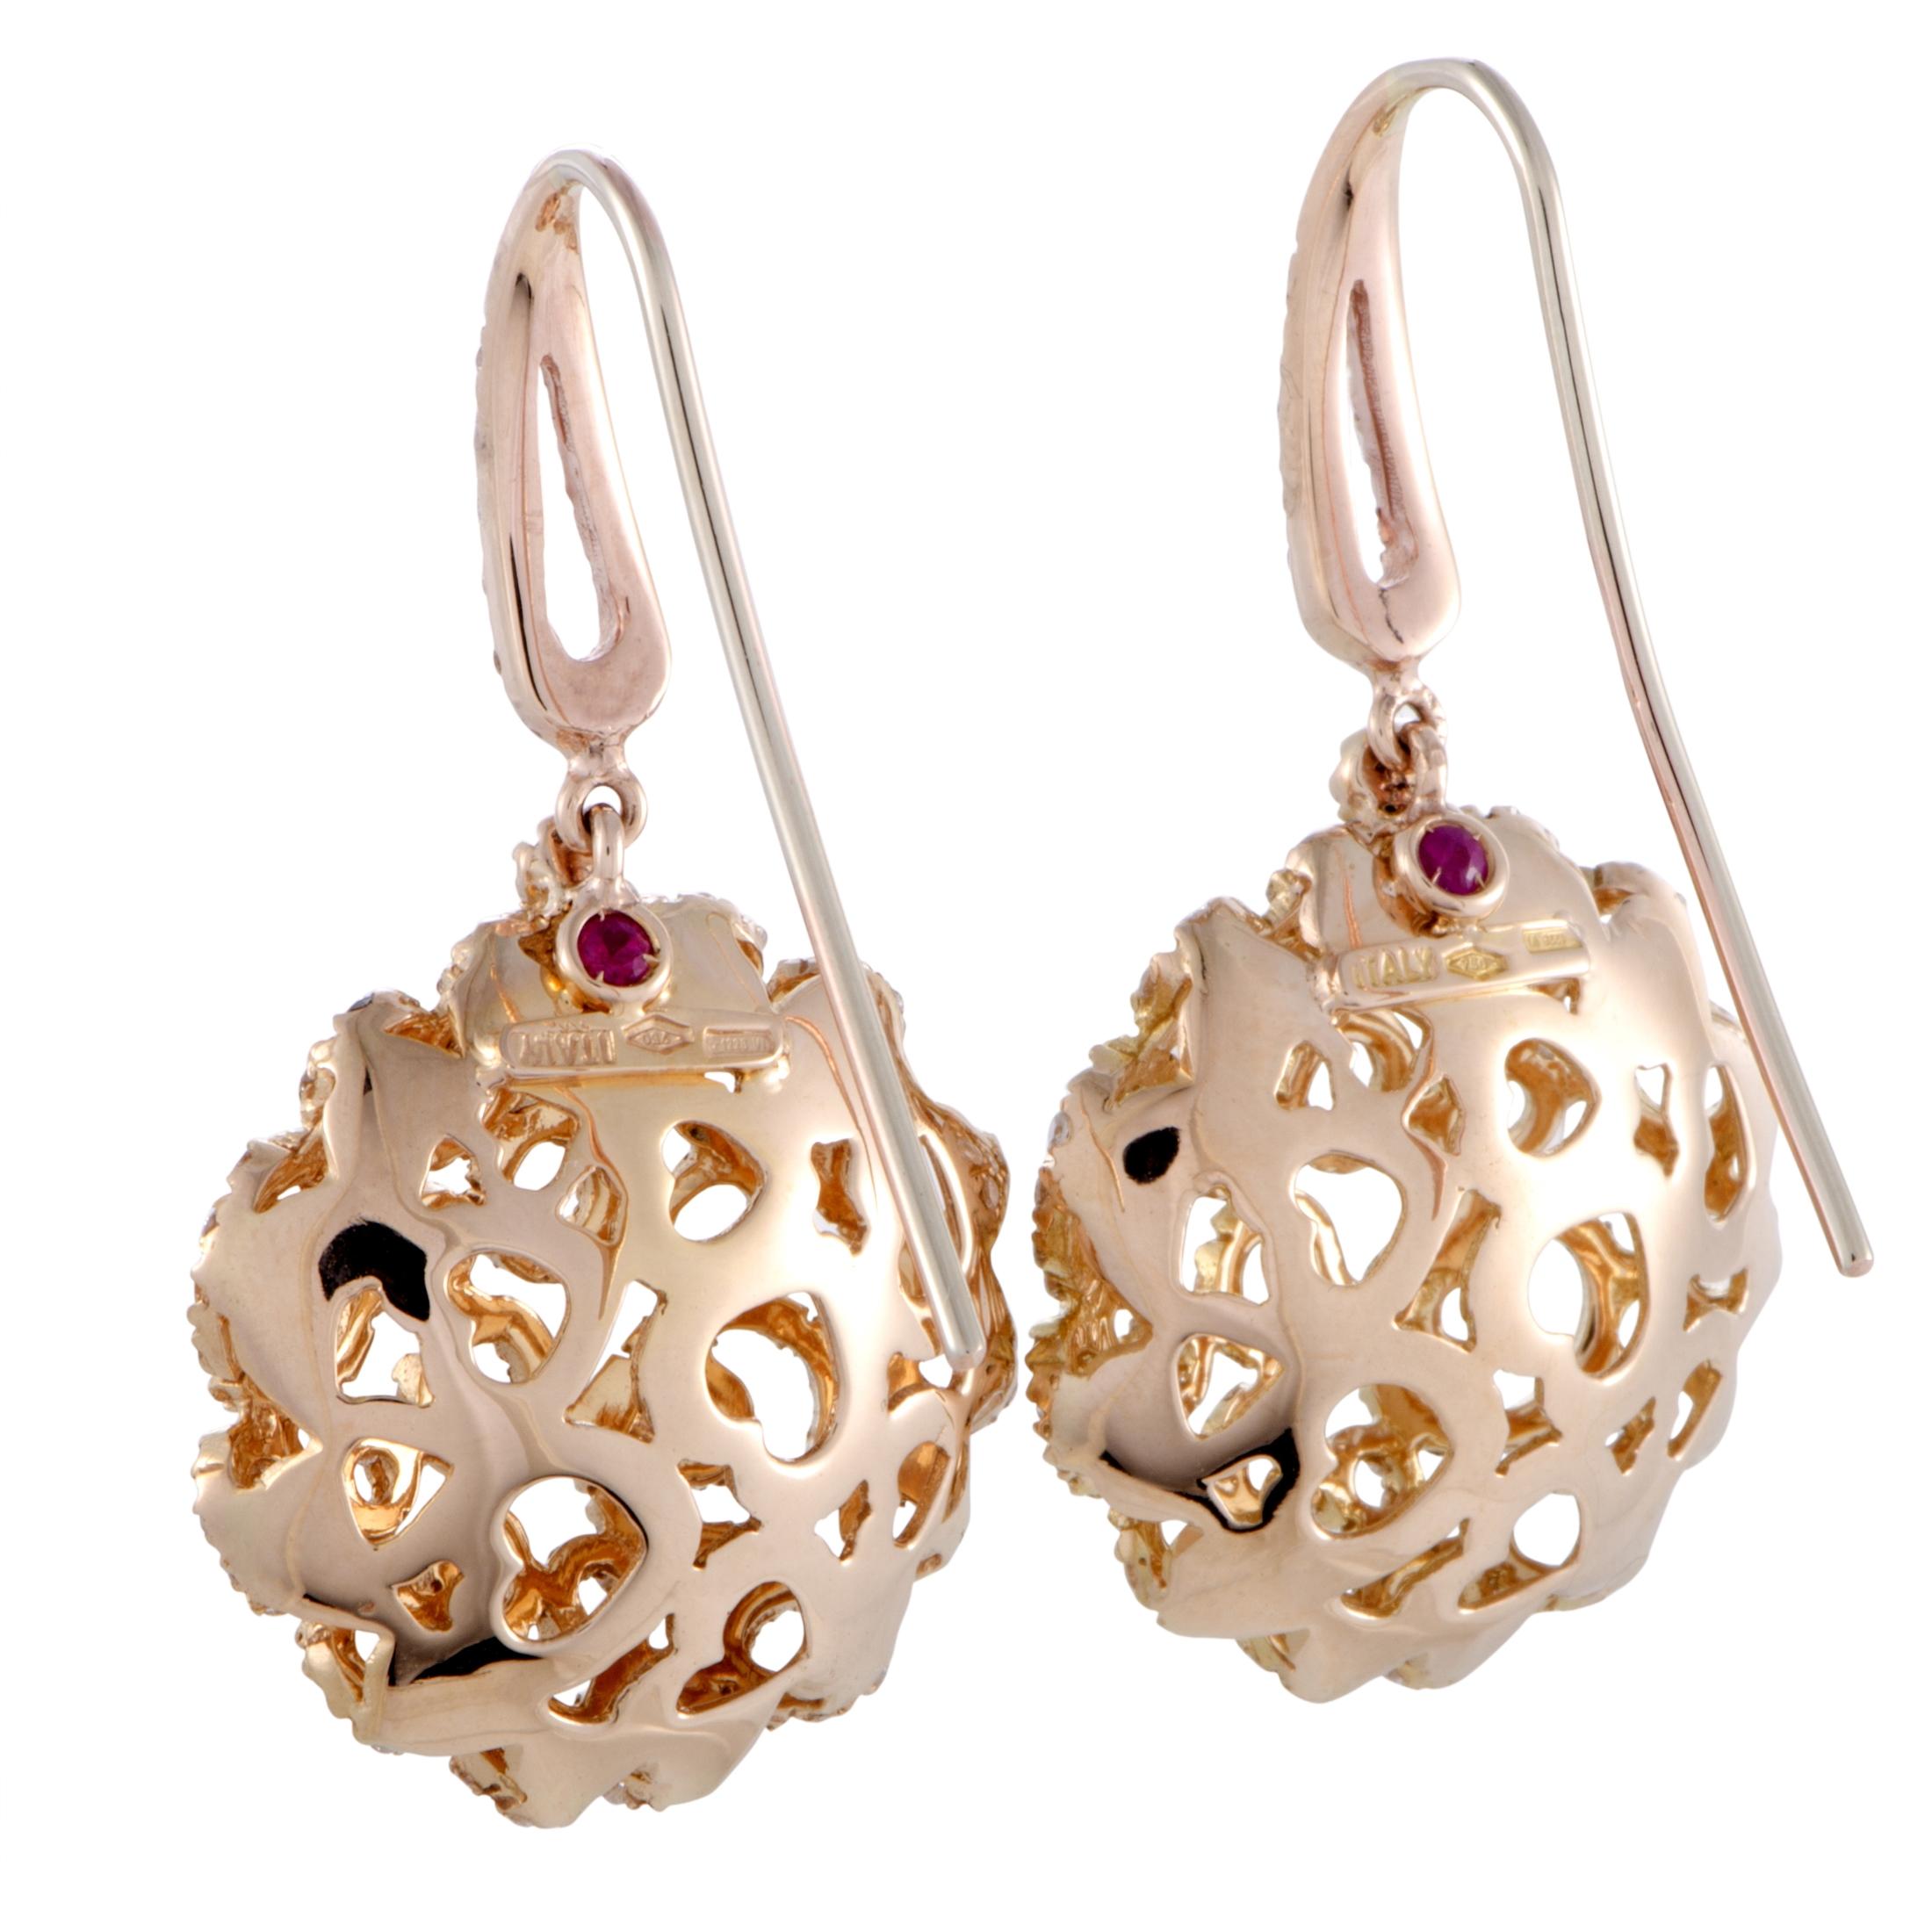 A fascinating show of fabulous radiance and lustrous exuberance, this majestic pair of earrings from Roberto Coin offers eye-catching visual presence while achieving a remarkably tasteful overall tone in the classically stylish combination of